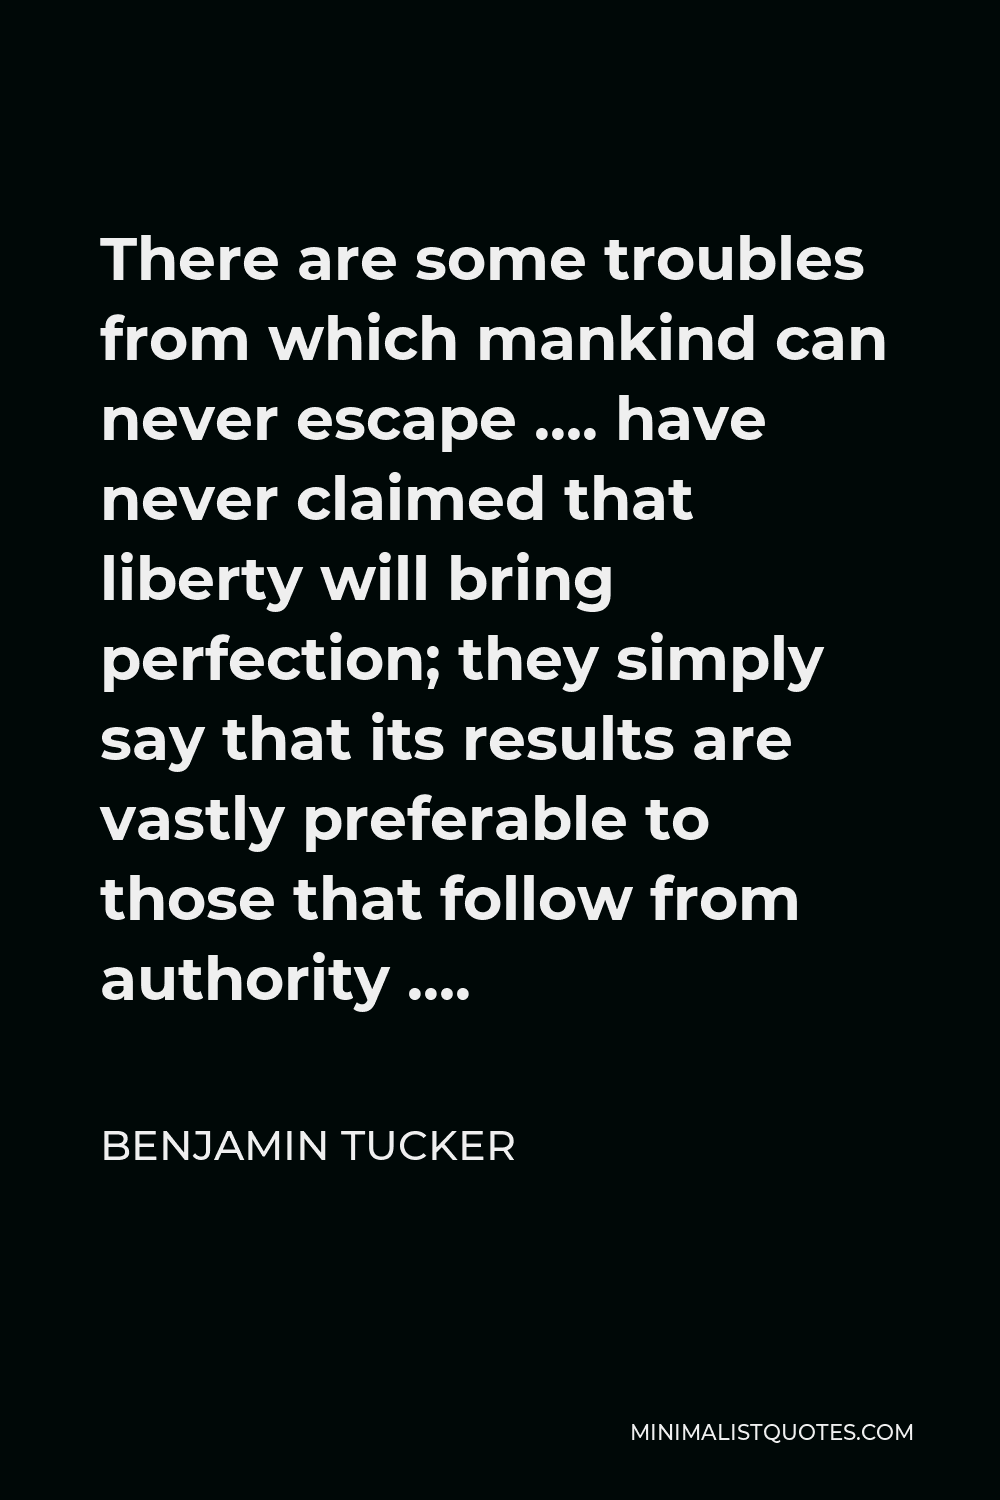 Benjamin Tucker Quote - There are some troubles from which mankind can never escape …. have never claimed that liberty will bring perfection; they simply say that its results are vastly preferable to those that follow from authority ….